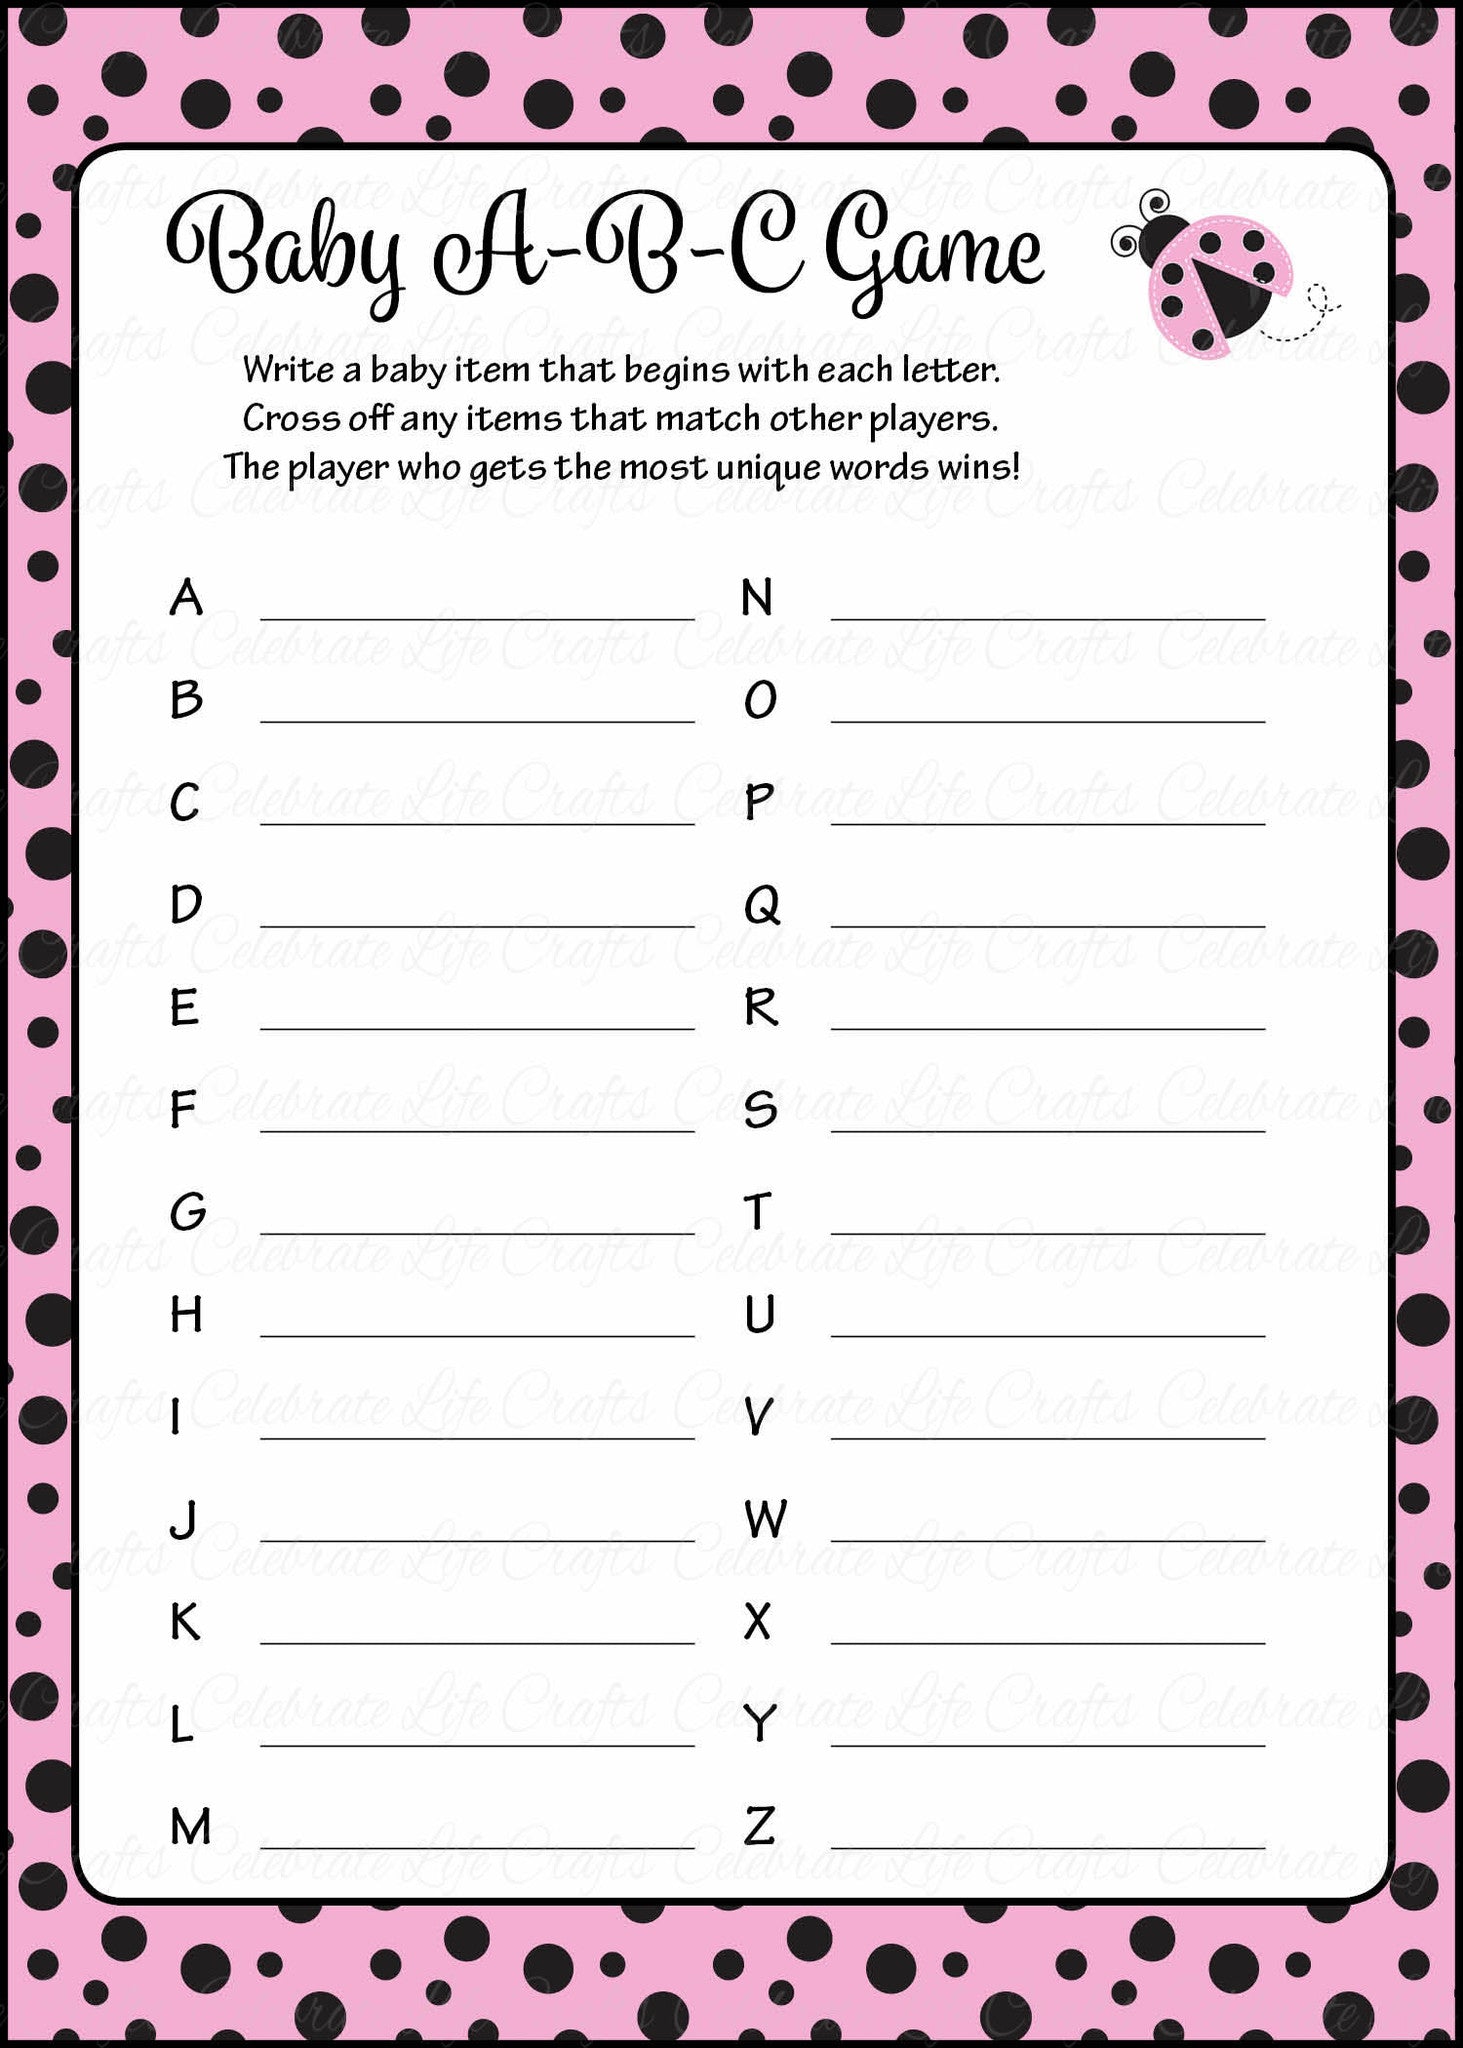 baby-abc-s-baby-shower-game-ladybug-baby-shower-theme-for-baby-girl-pink-black-celebrate